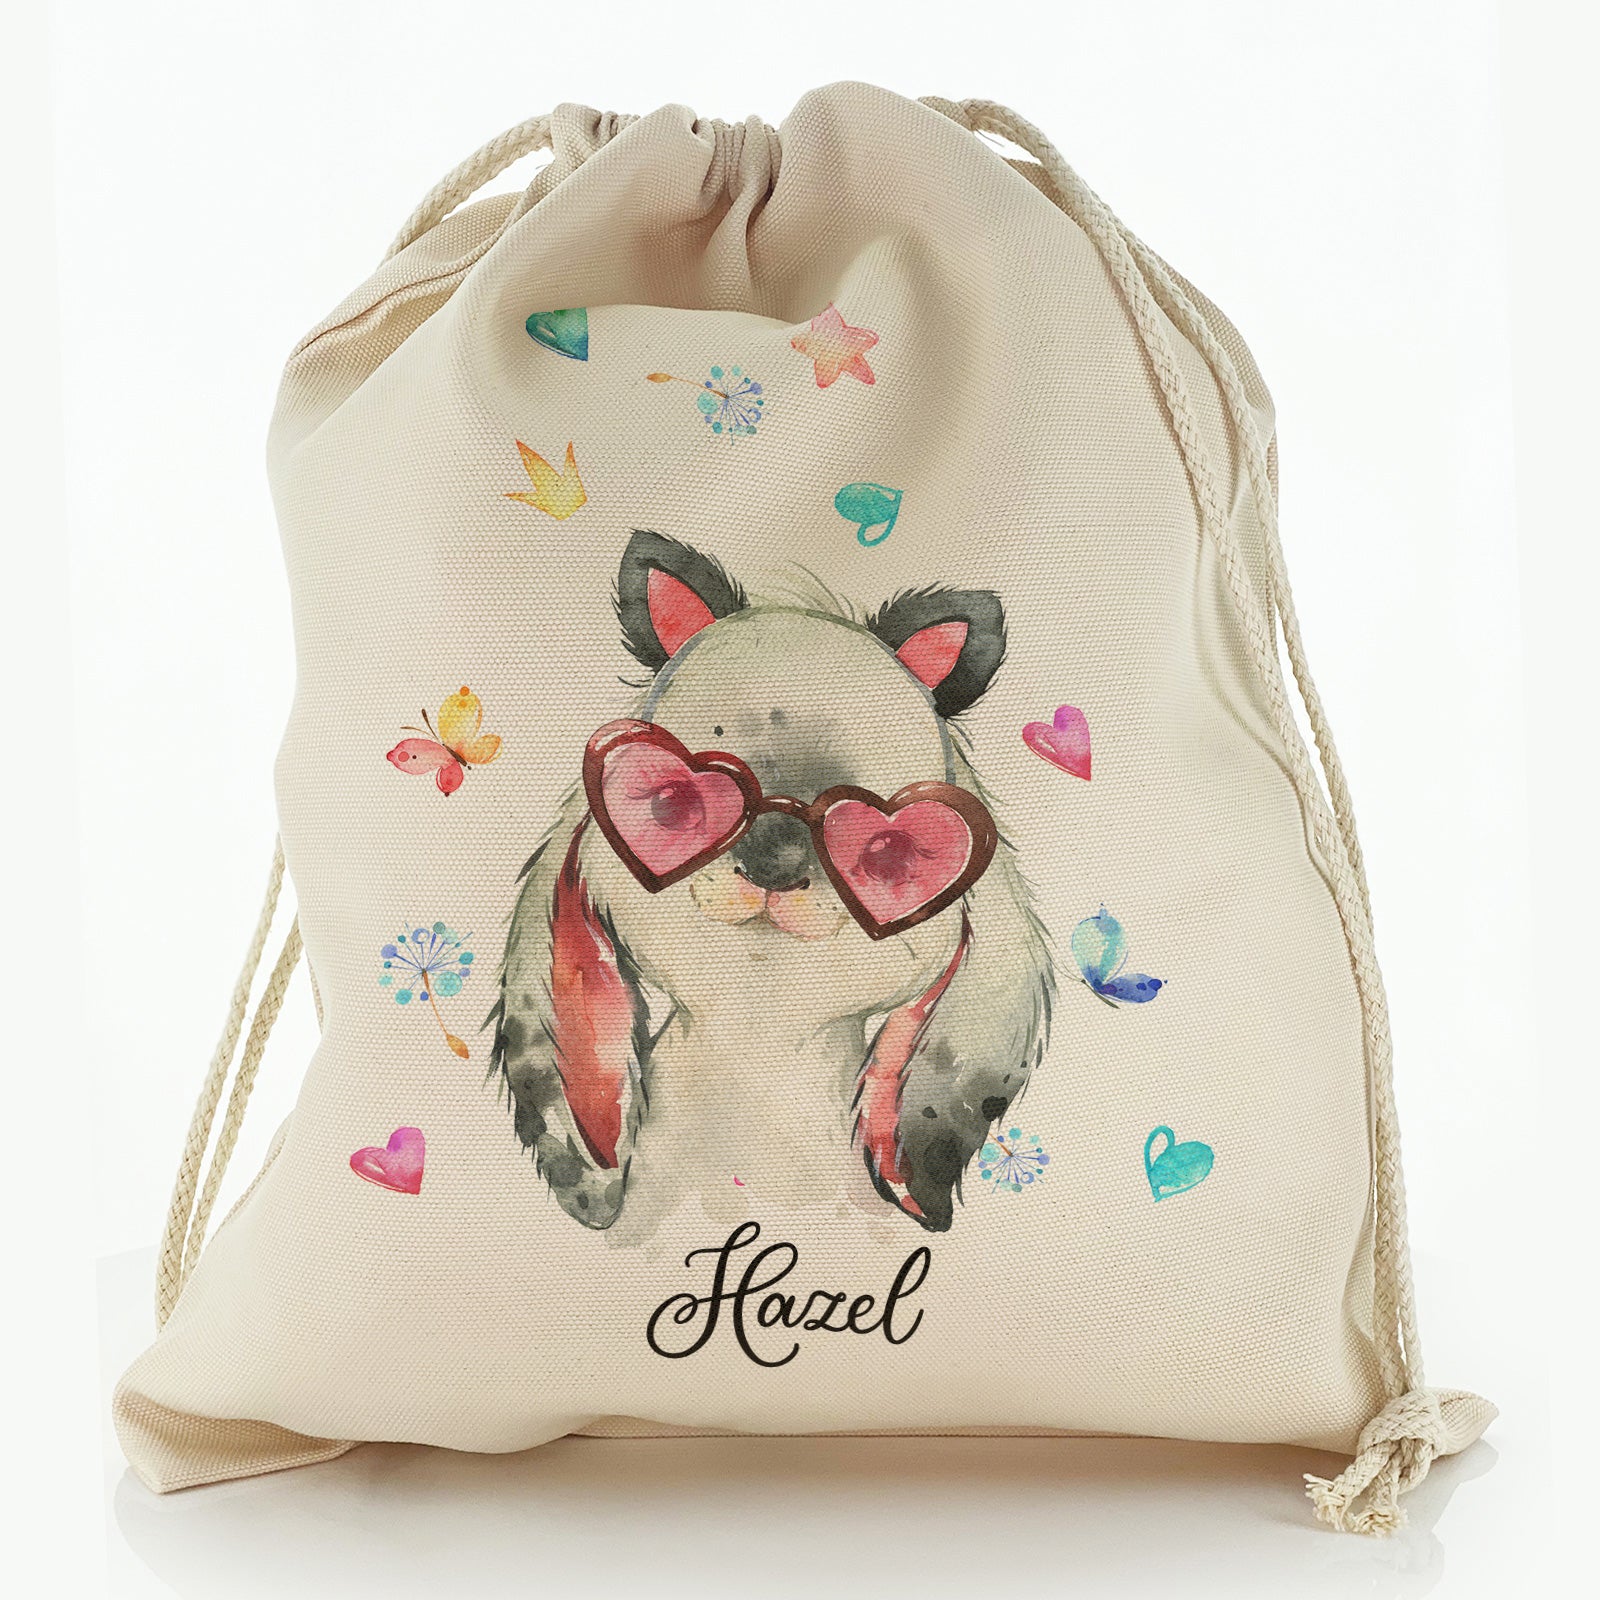 Personalised Canvas Sack with Grey Rabbit with Cat ears and Pink Heart Glasses and Cute Text